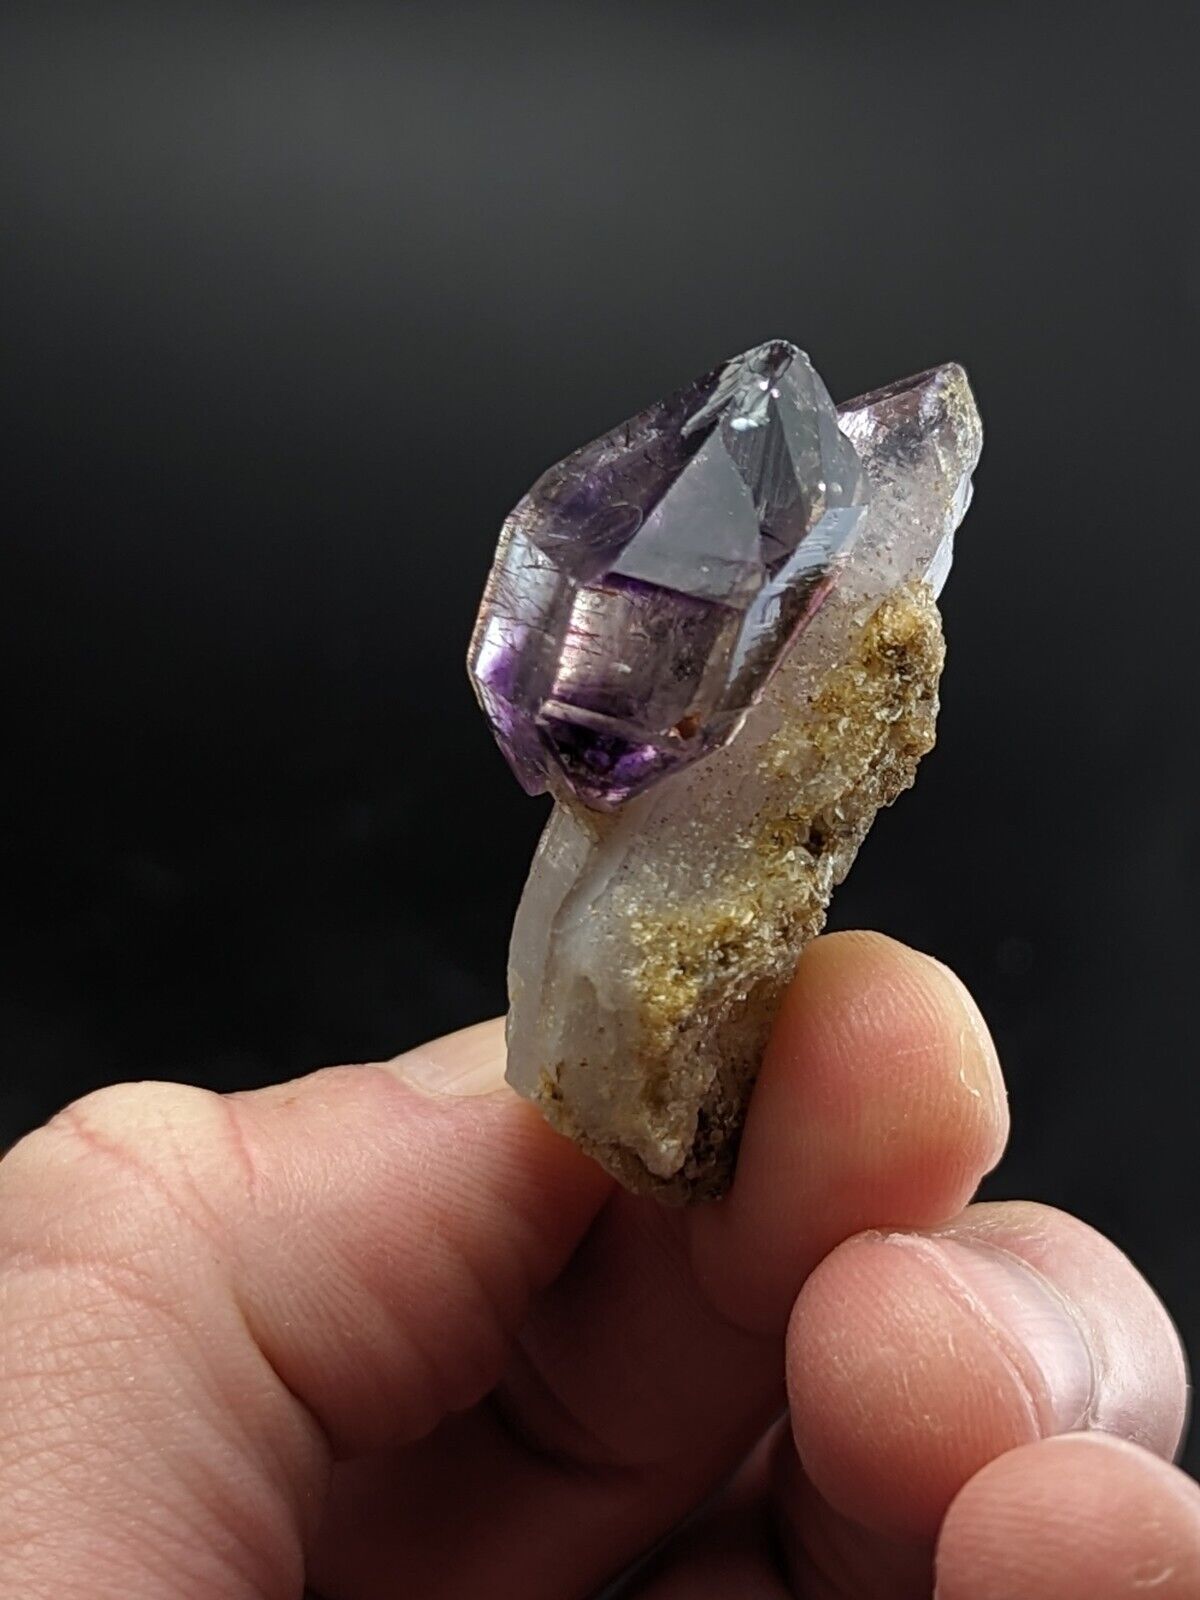 A Very Unique Shangaan Amethyst Scepter Crystal from Chibuku Zimbabwe